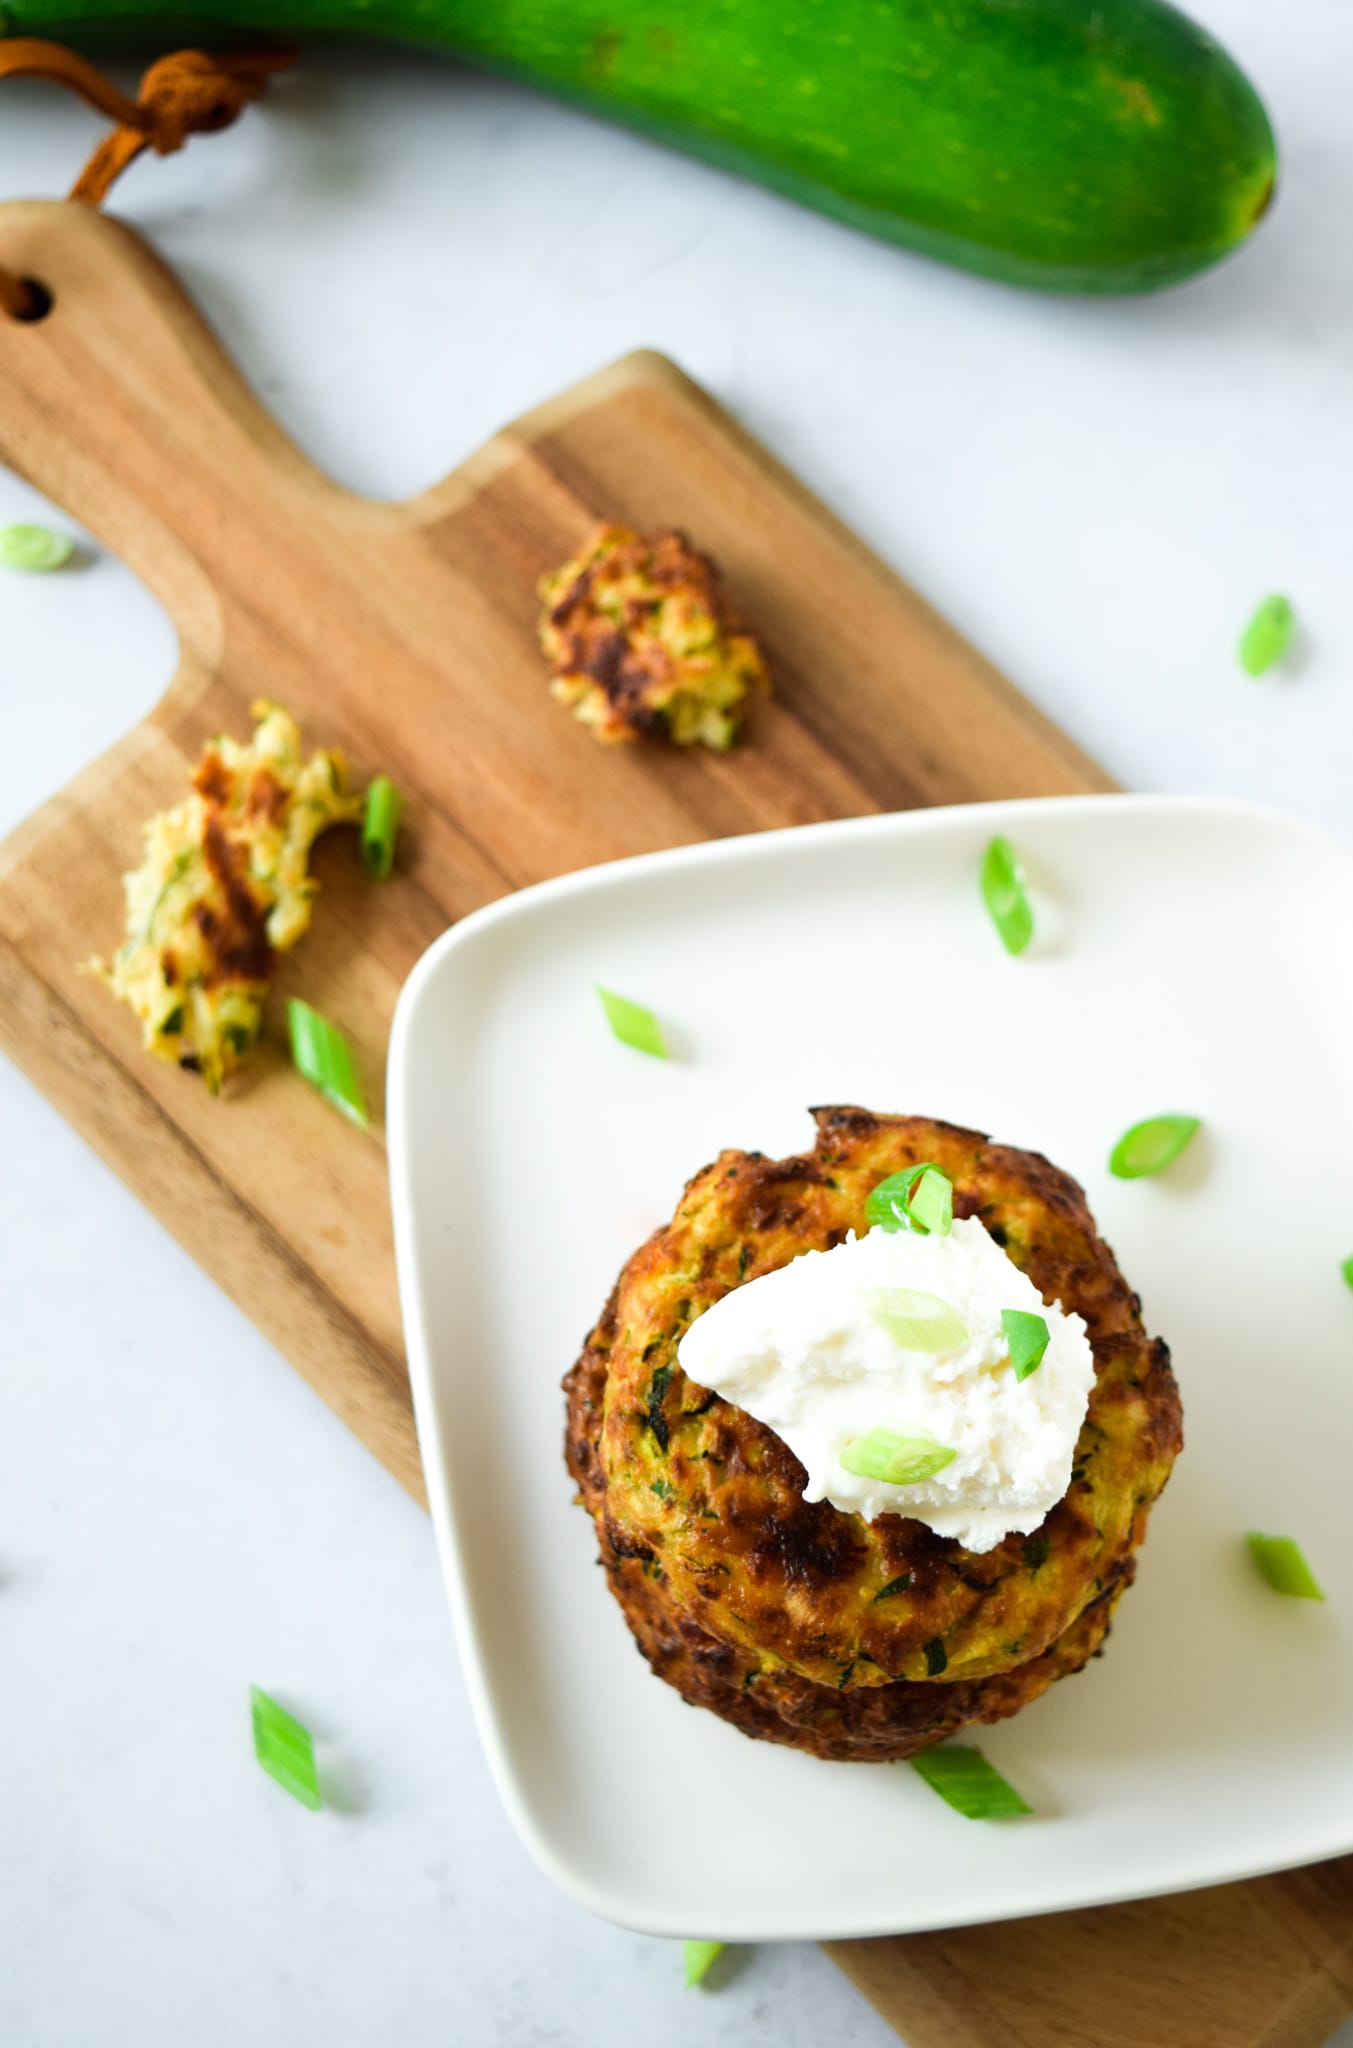 Zucchini Fritter with dollop of sour cream